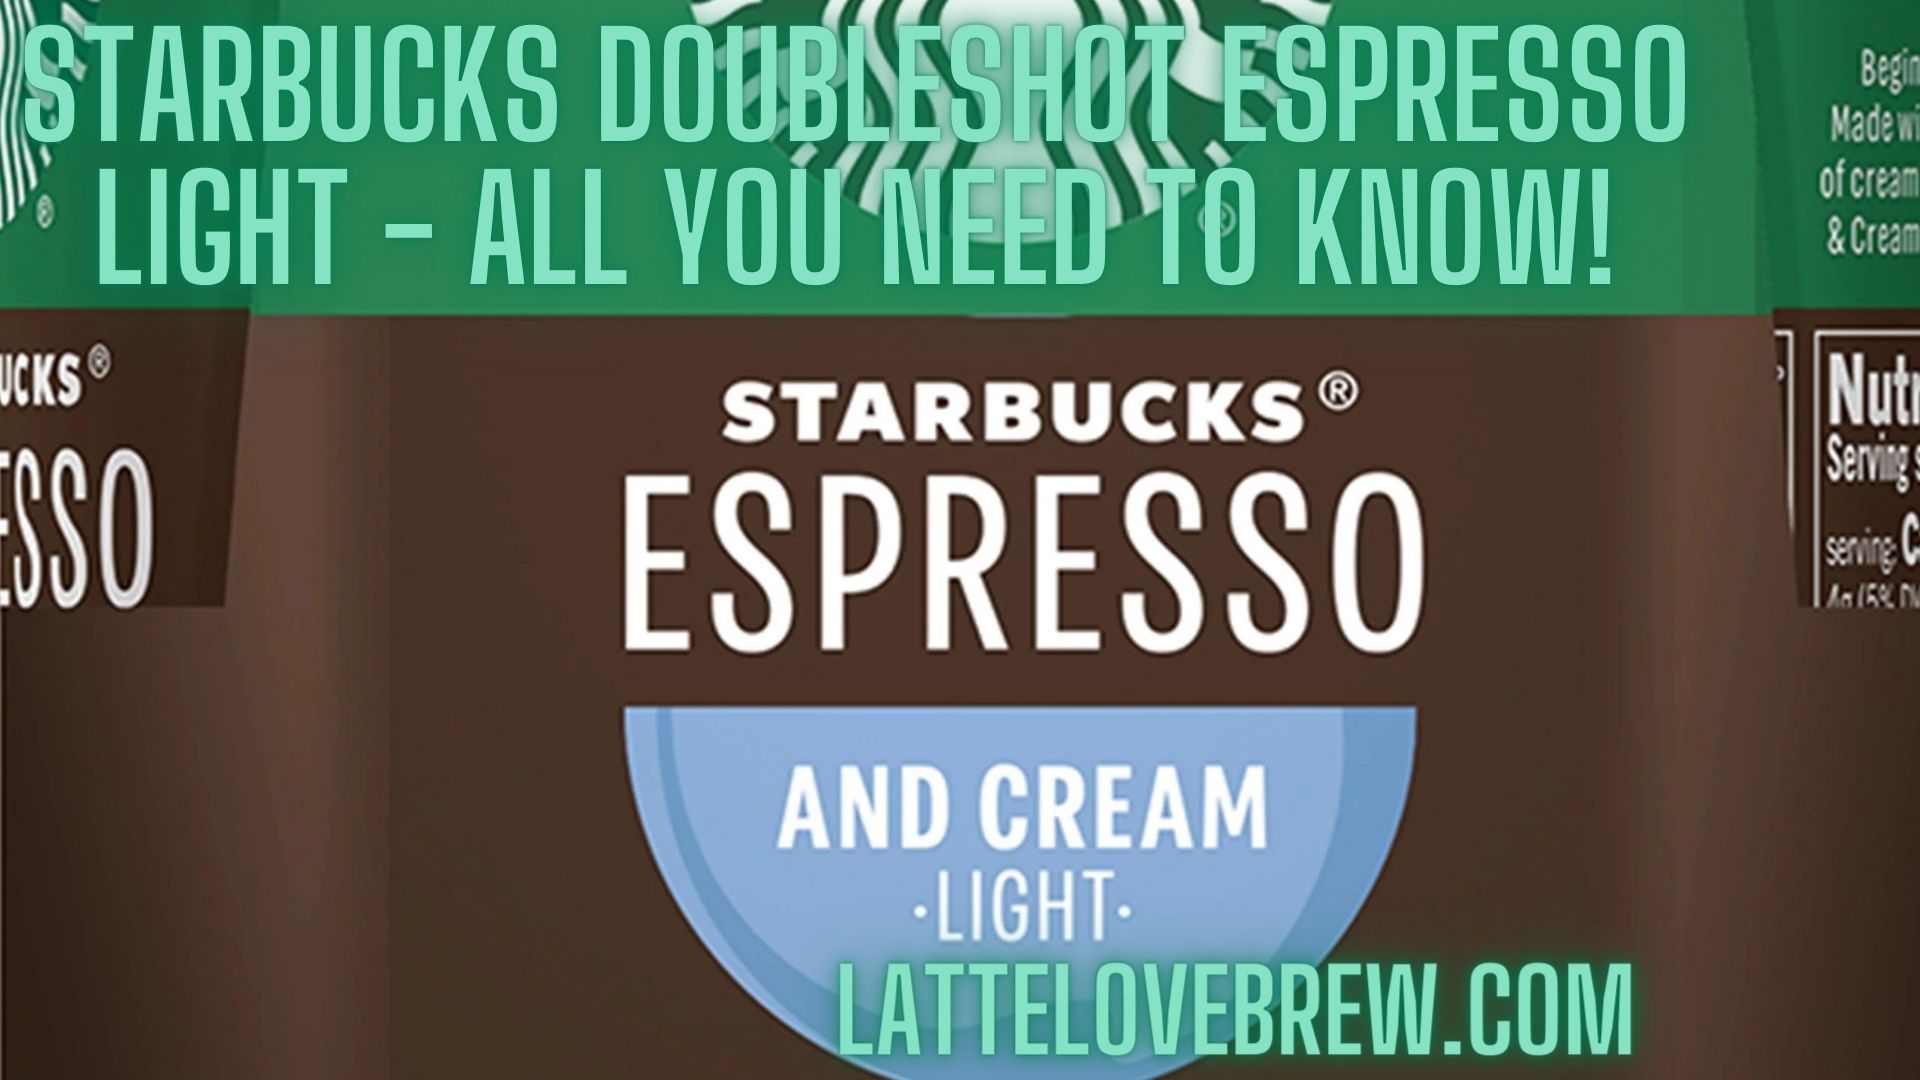 Starbucks Doubleshot Espresso Light - All You Need To Know!